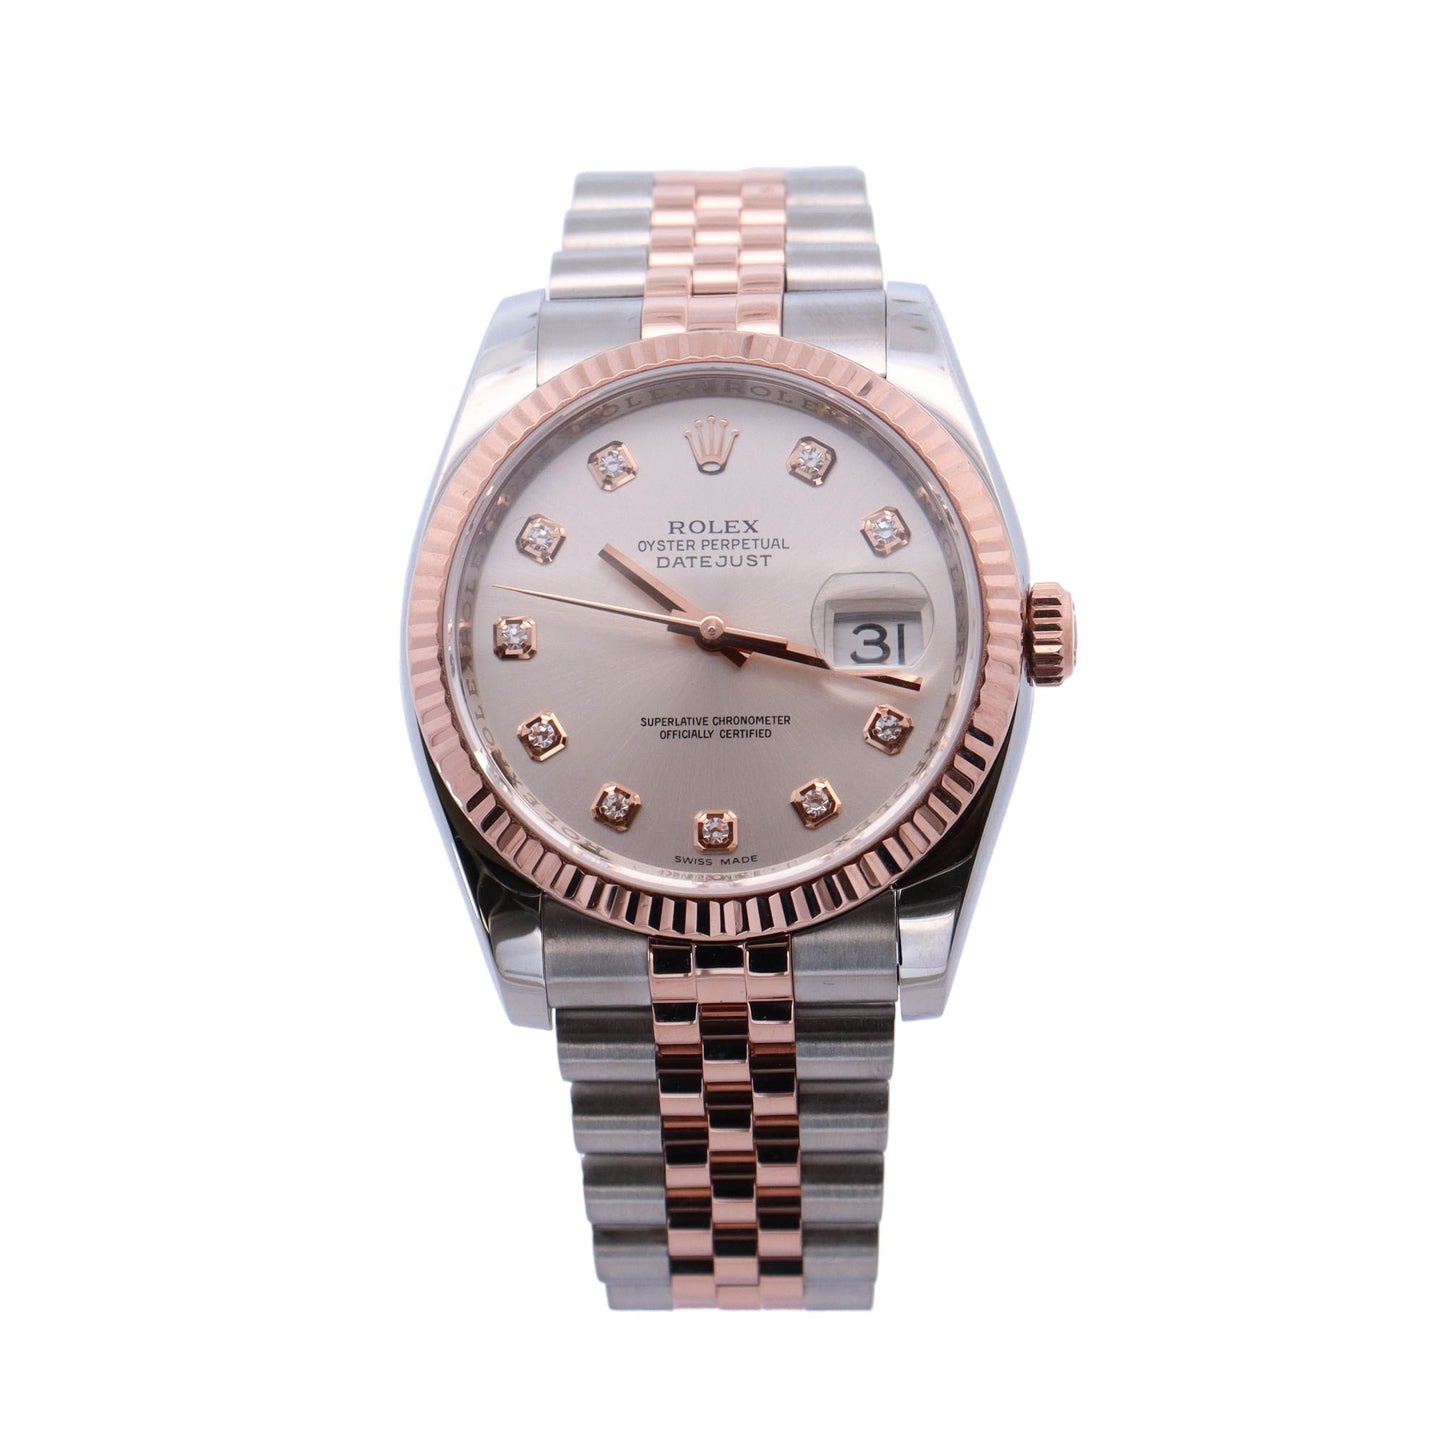 Rolex Datejust Two-Tone Rose Gold & Stainless Steel 36mm Silver Diamond Dot Dial Watch Reference #: 116231 - Happy Jewelers Fine Jewelry Lifetime Warranty